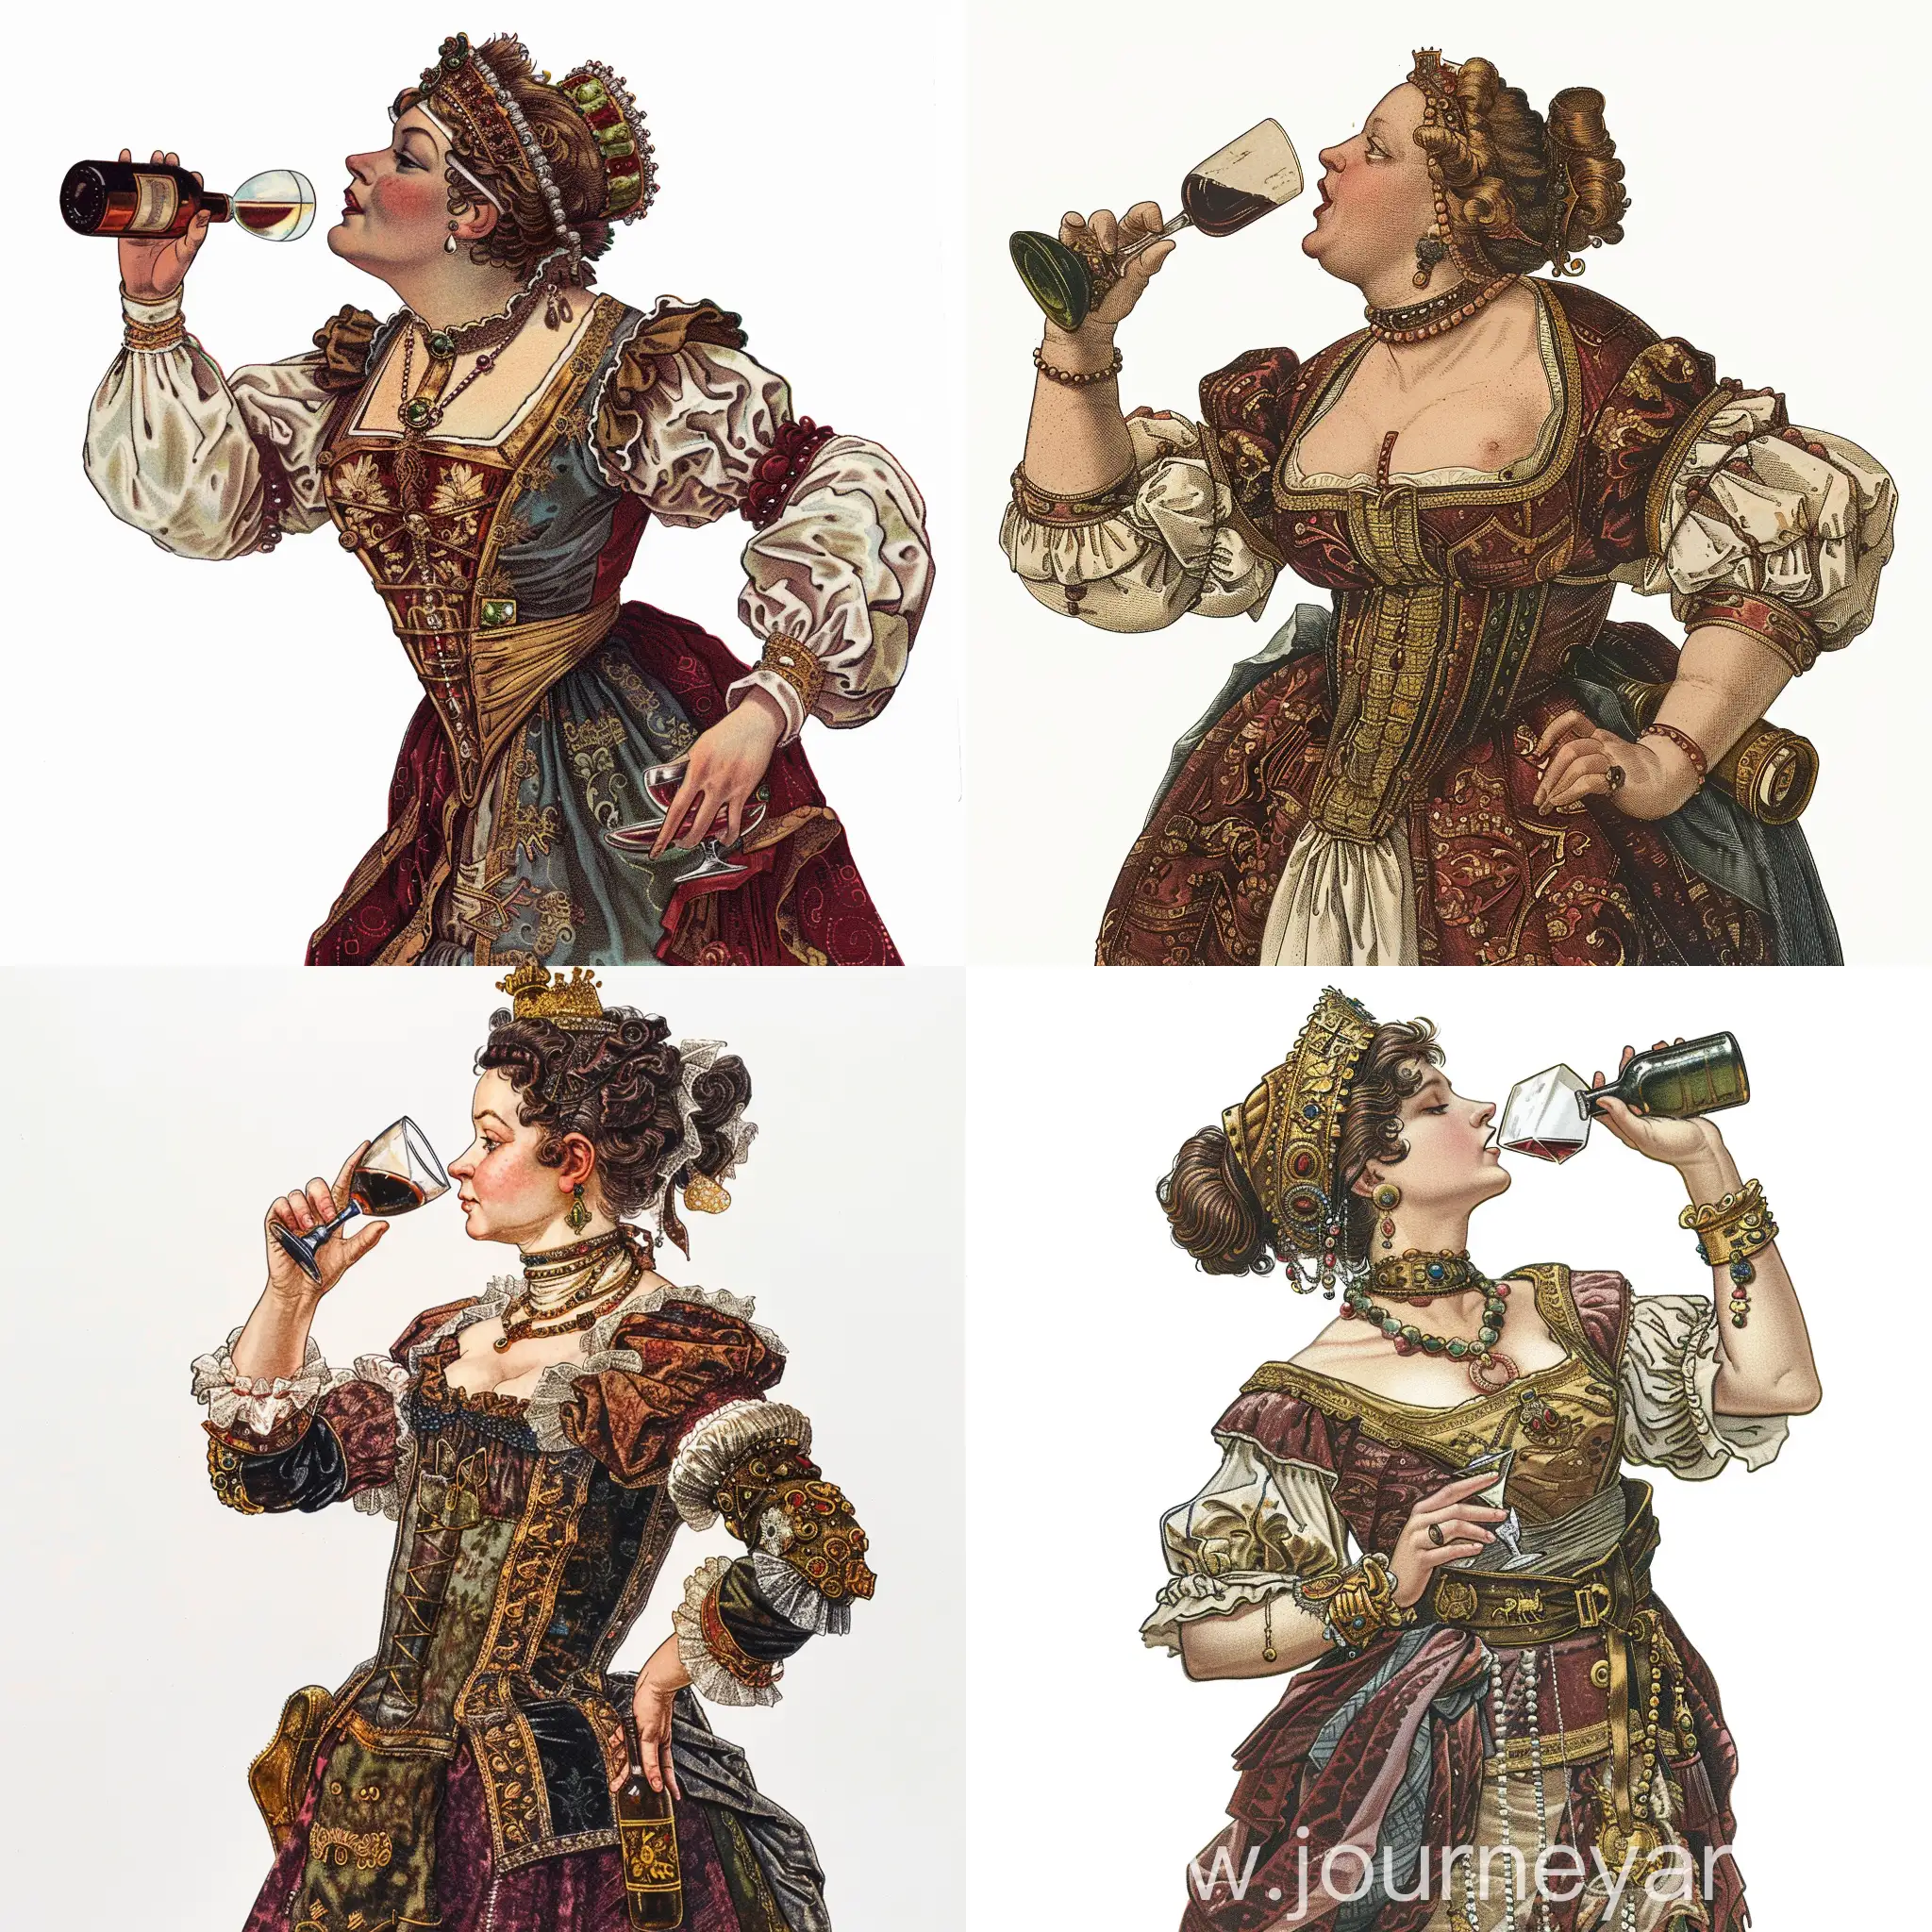 waist portrait of an ancient Ausrtria Queen, in profile, with a glass in his hand, which he brings to his mouth, the second hand is bent and holds a bottle of wine near his waist, in very rich clothes, color illustration, on a white background, Arthur Wrexham style